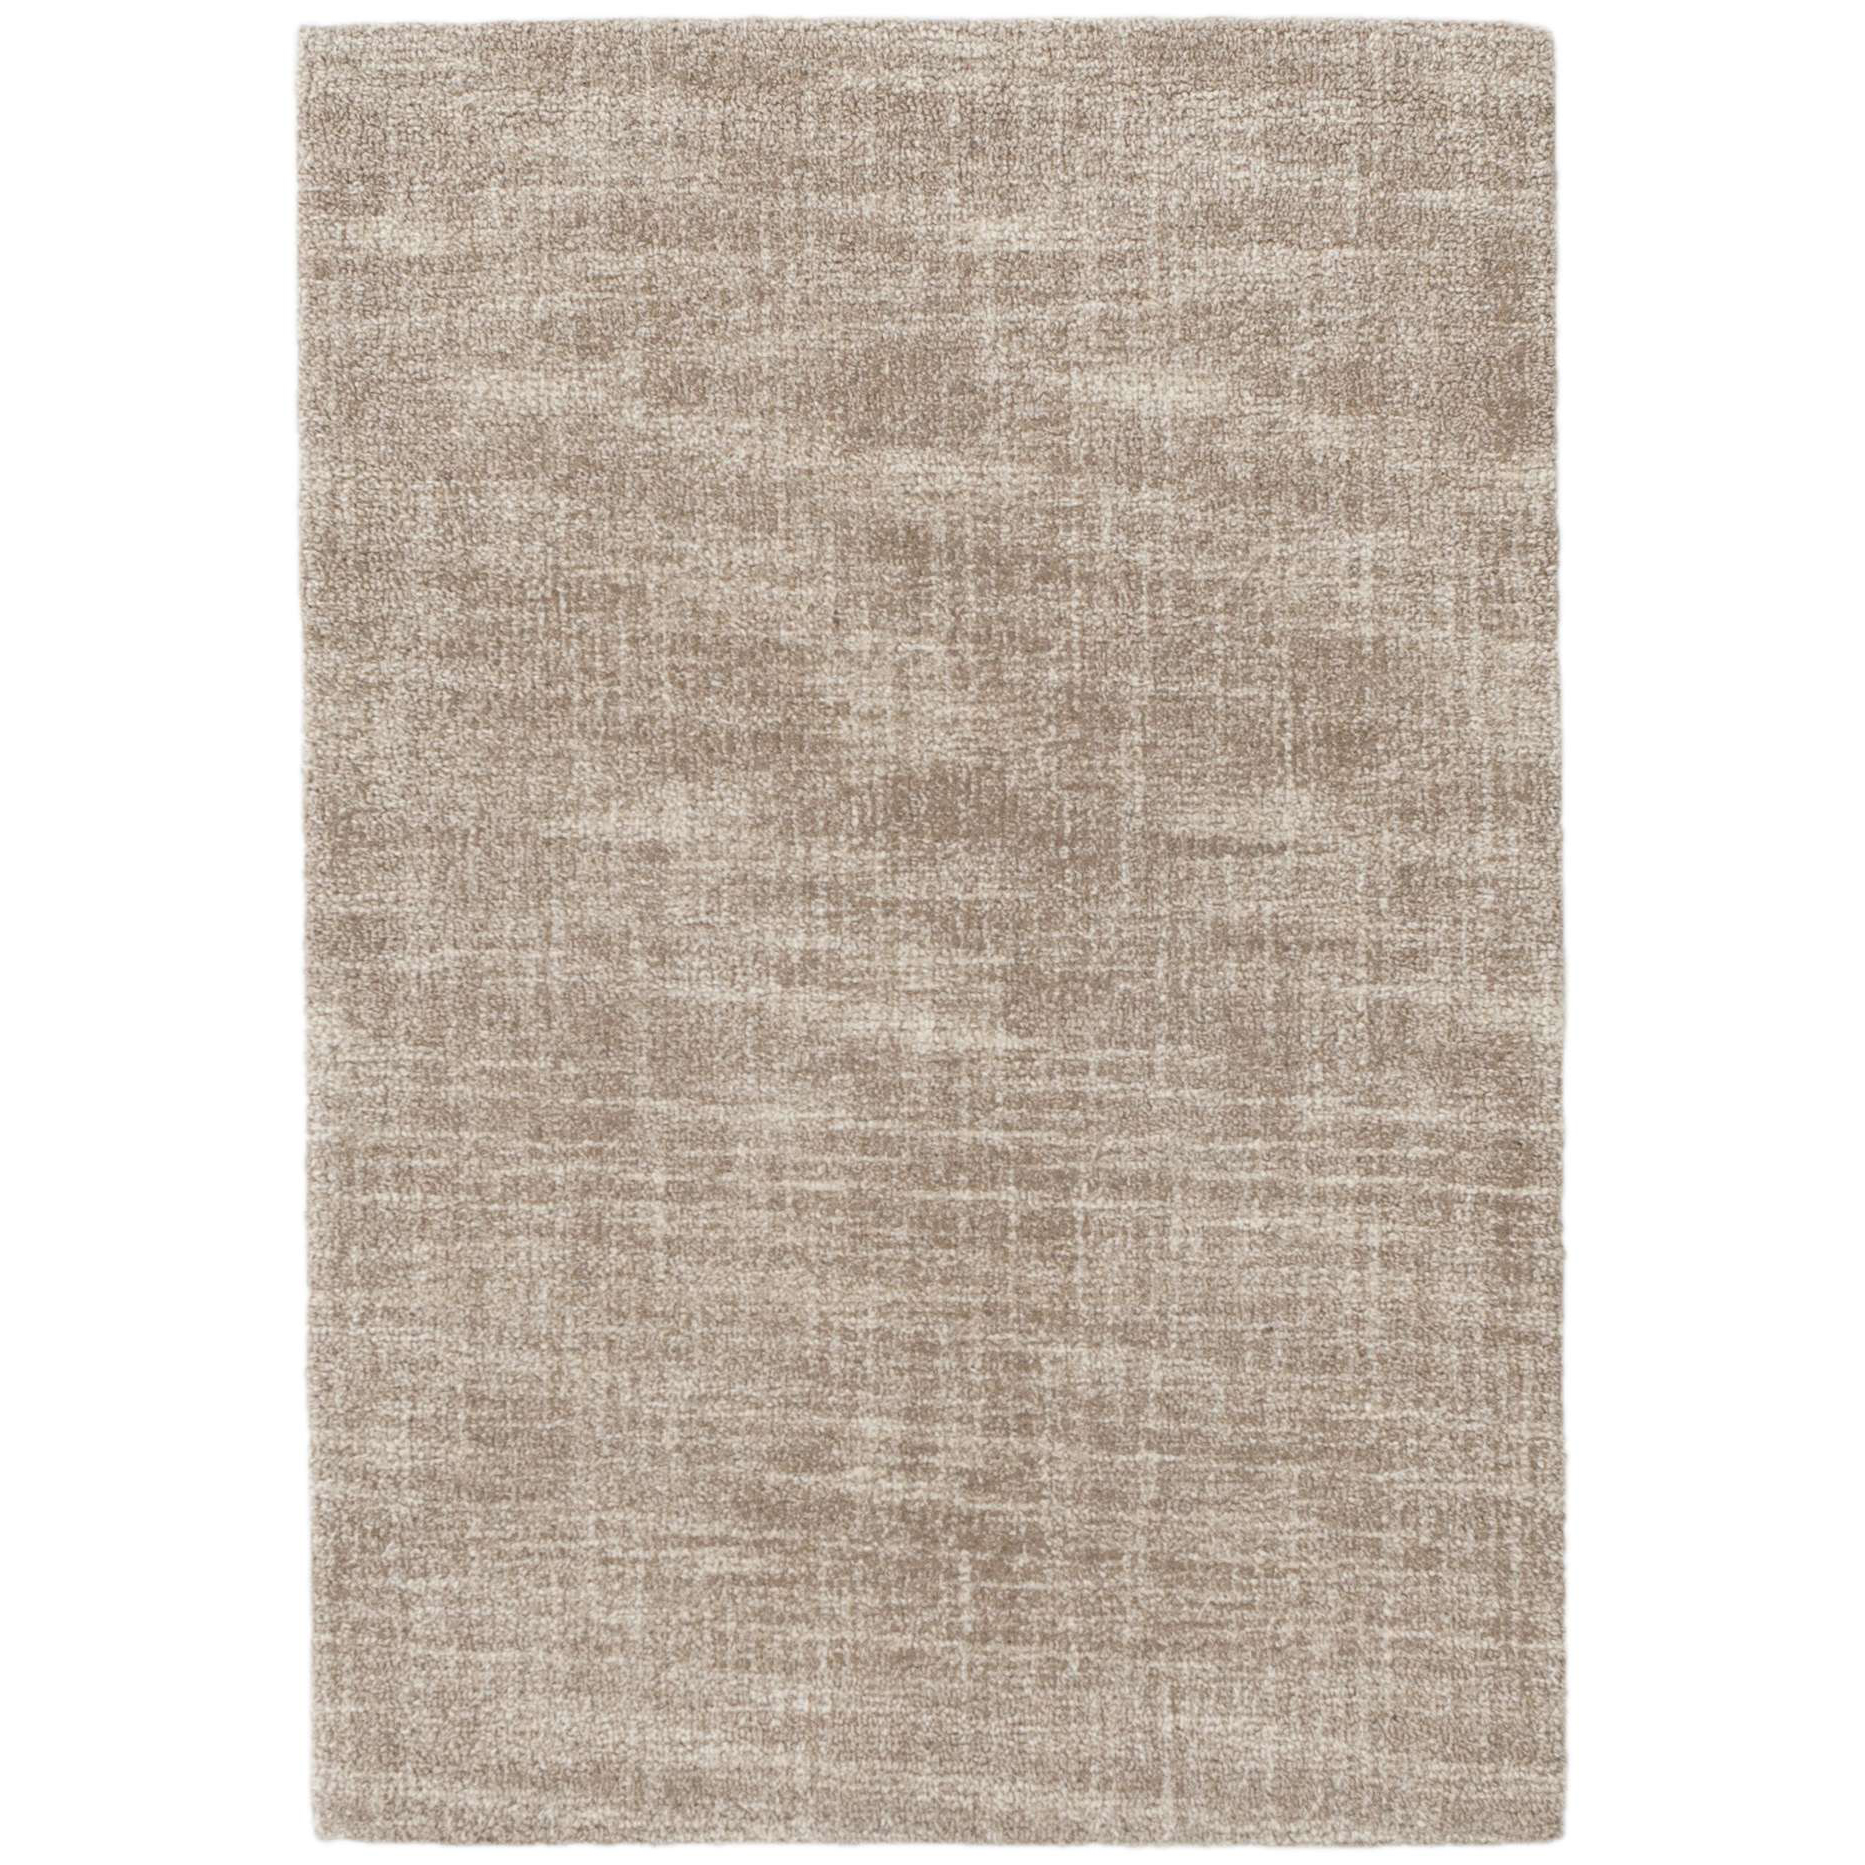 Transitional & Casual Rugs Crosshatch Sand Camel - Taupe & Ivory - Beige Machine Made Rug